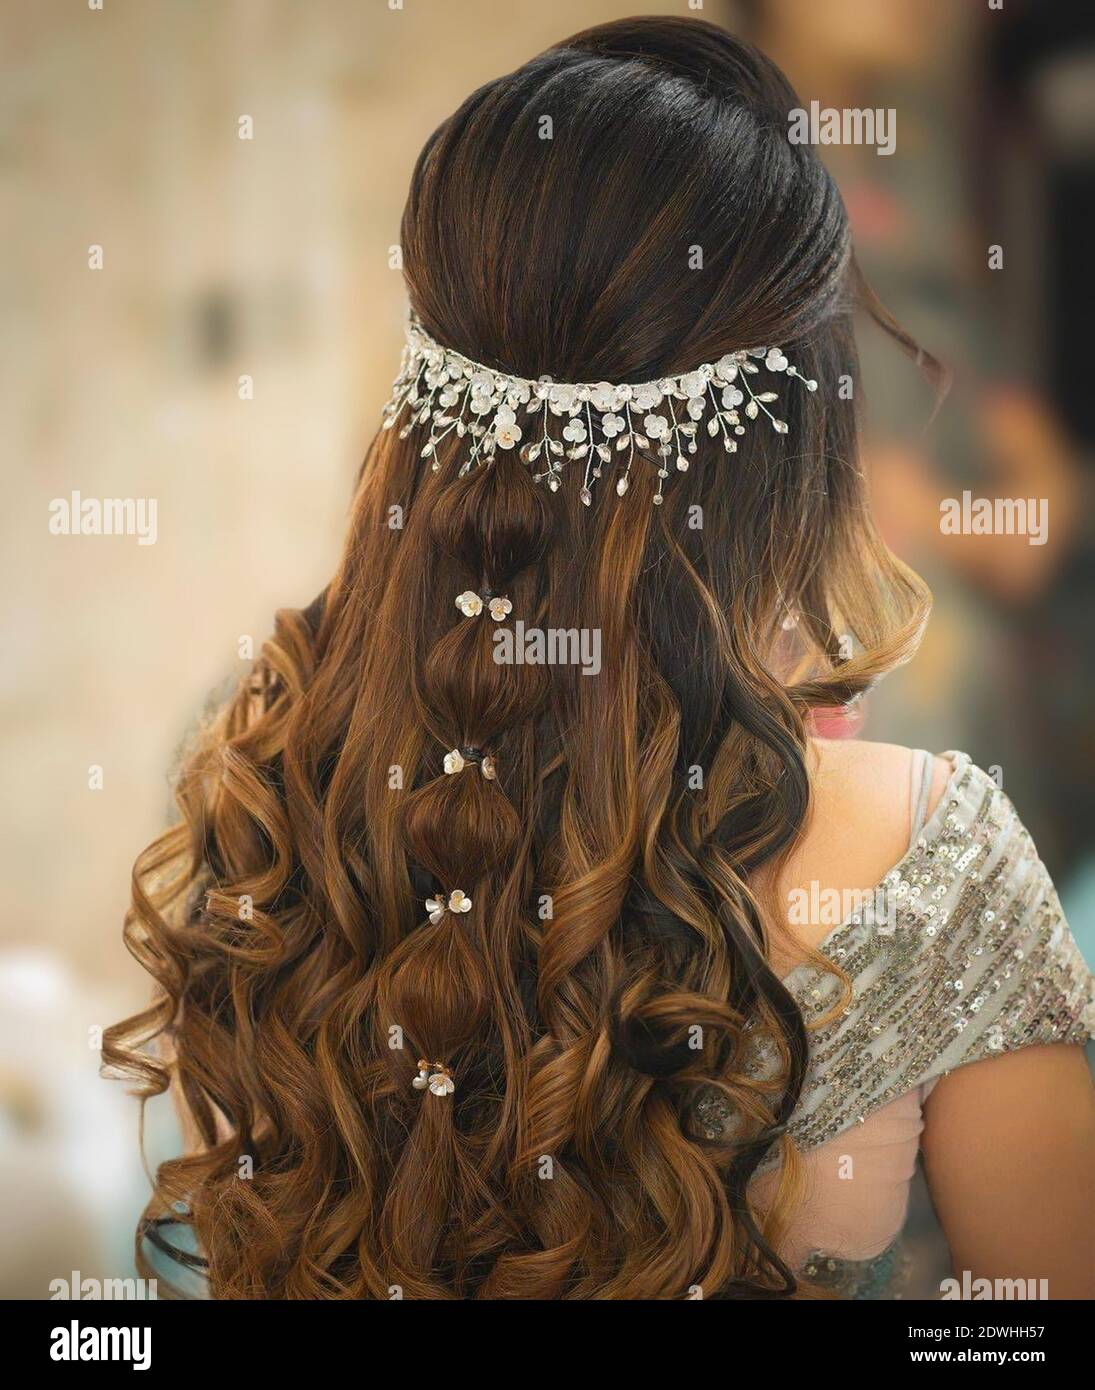 women showing her hairstyle Stock Photo